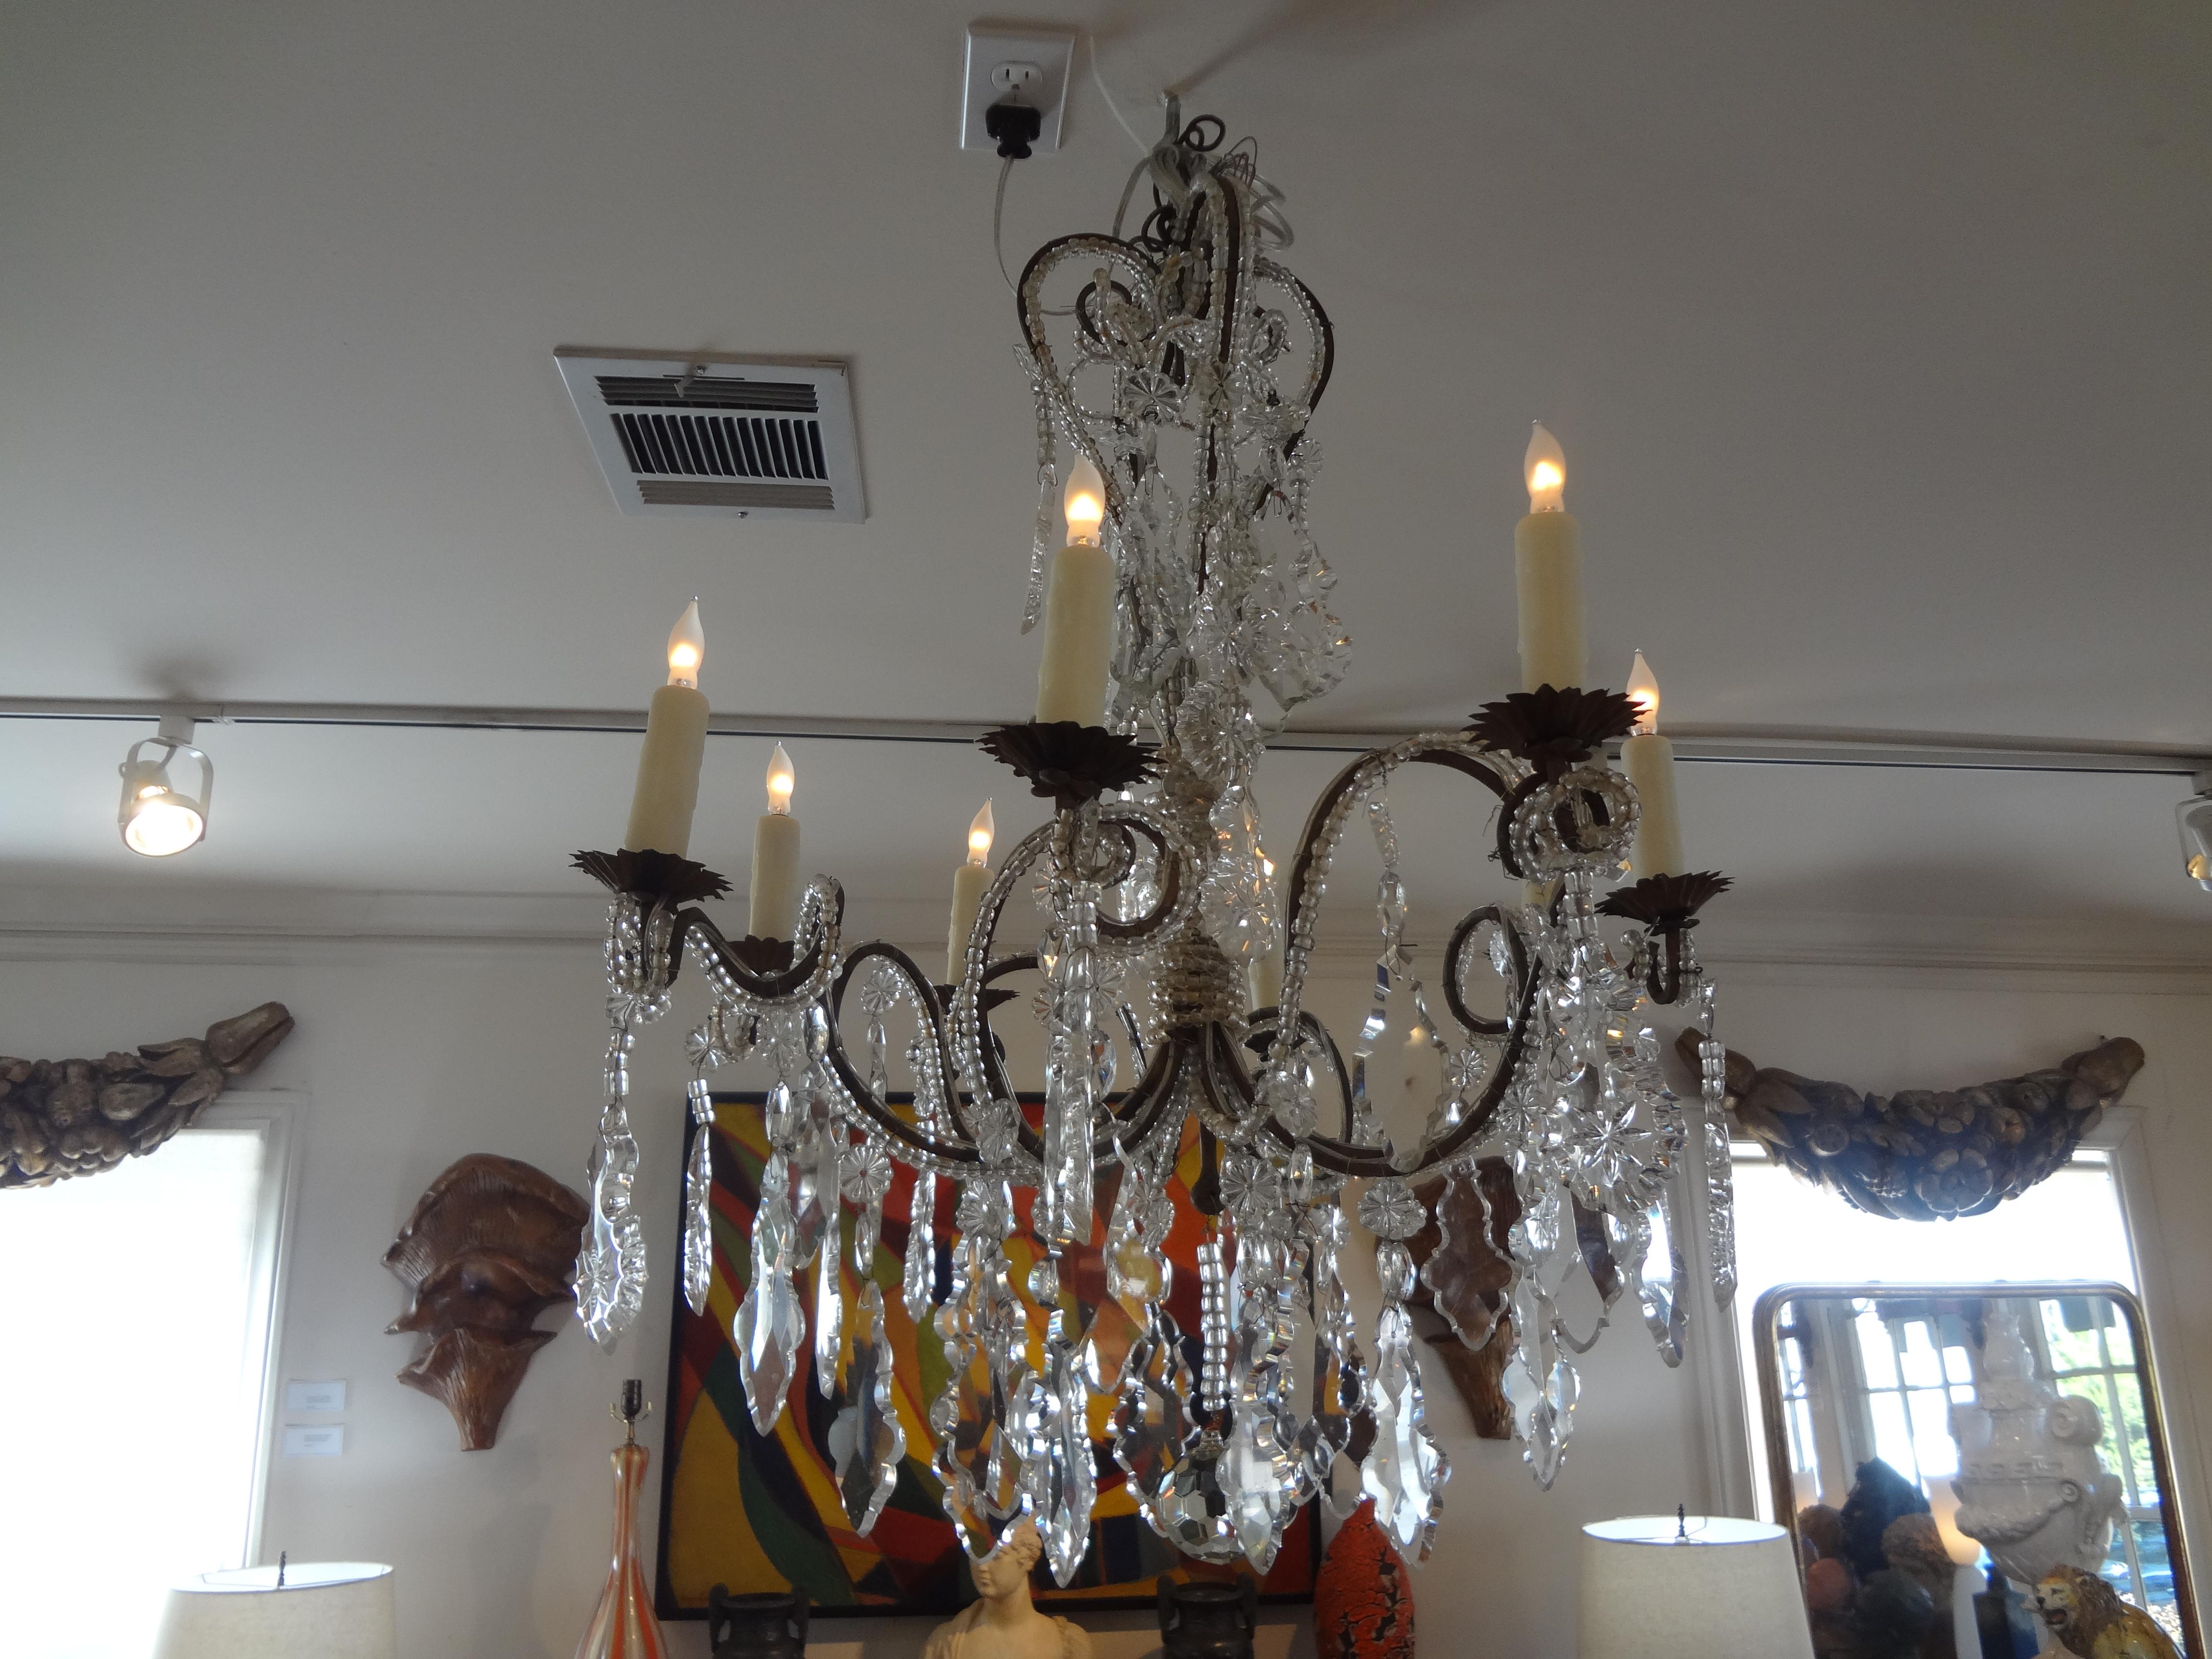 Stunning antique Italian beaded and crystal chandelier from the 1920s. This unusual Italian crystal chandelier has a crown at the top and an interesting swirl design to the beaded portion. Our antique Italian crystal chandelier has been newly wired